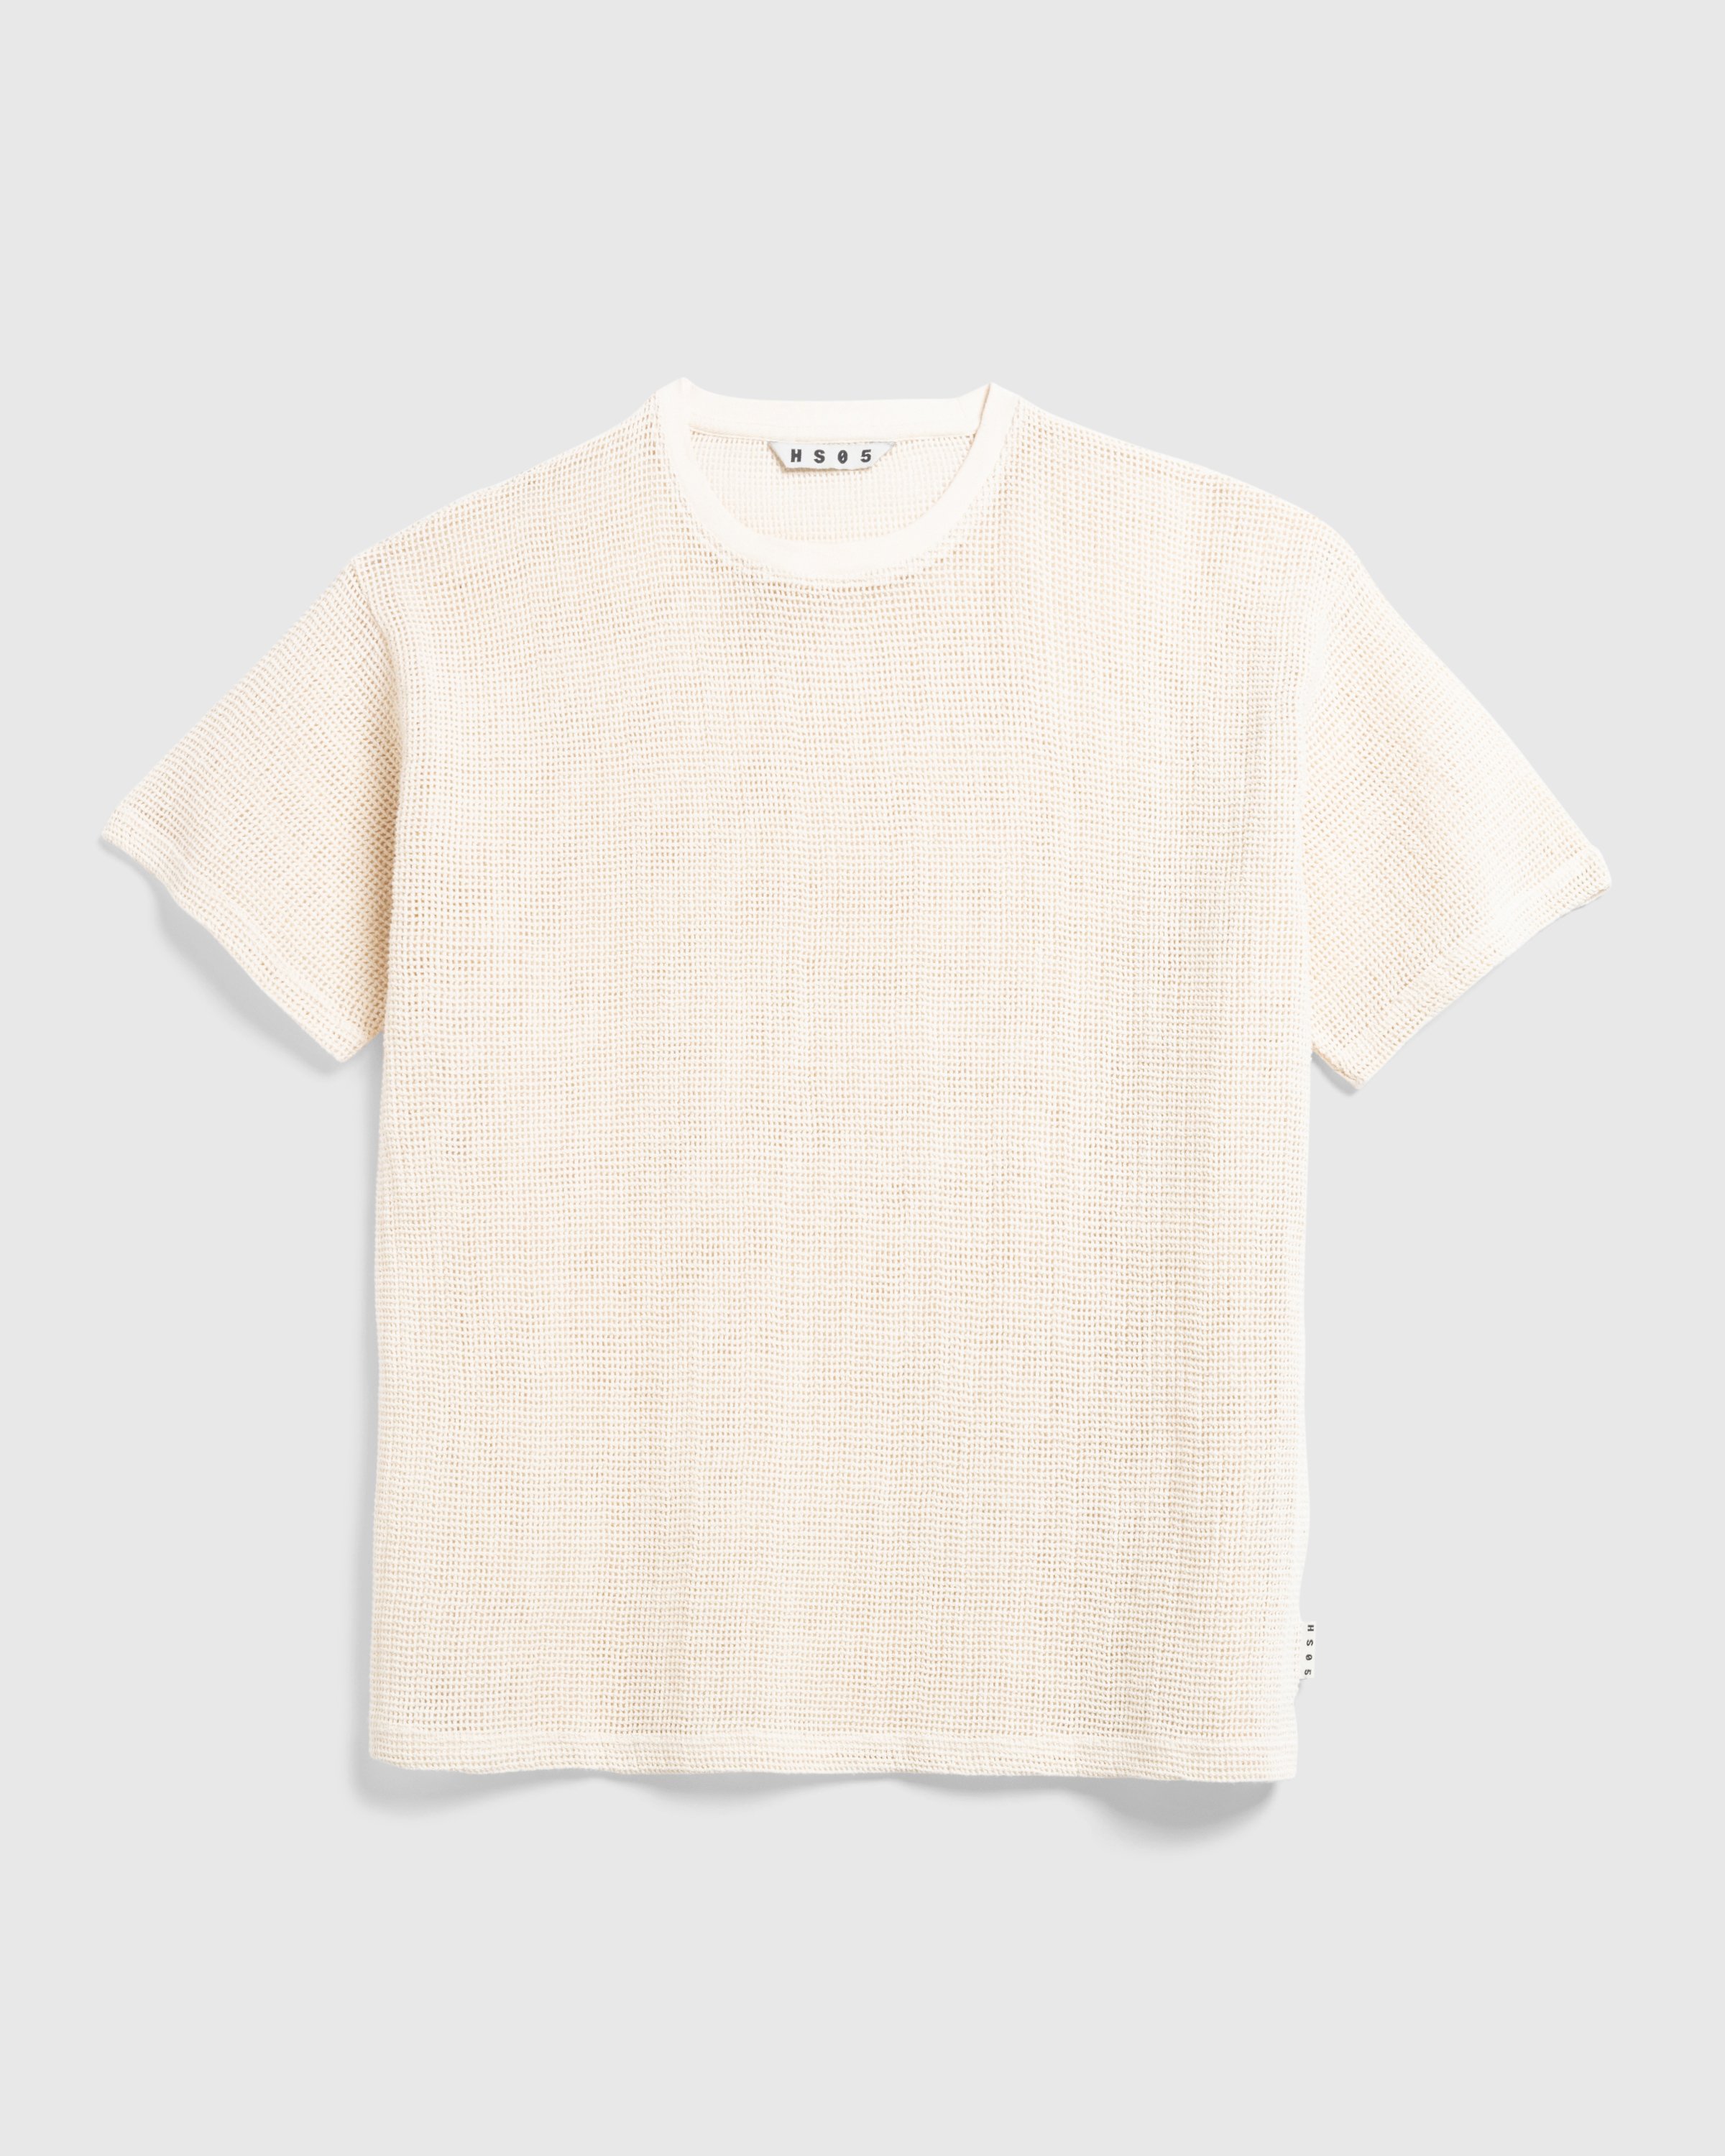 Highsnobiety HS05 - Pigment Dyed Cotton Mesh Knit Natural - Clothing -  - Image 1